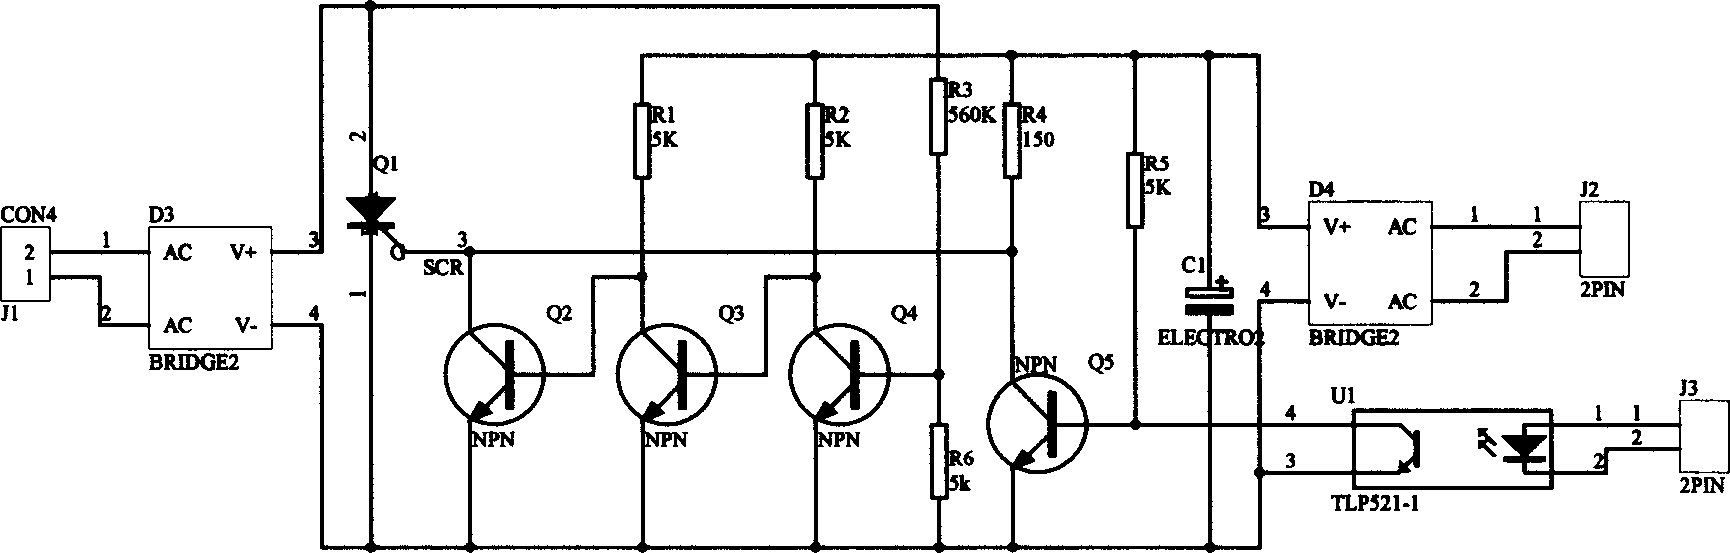 Controllable silicon triggering circuit for equipotential switching of capacitor